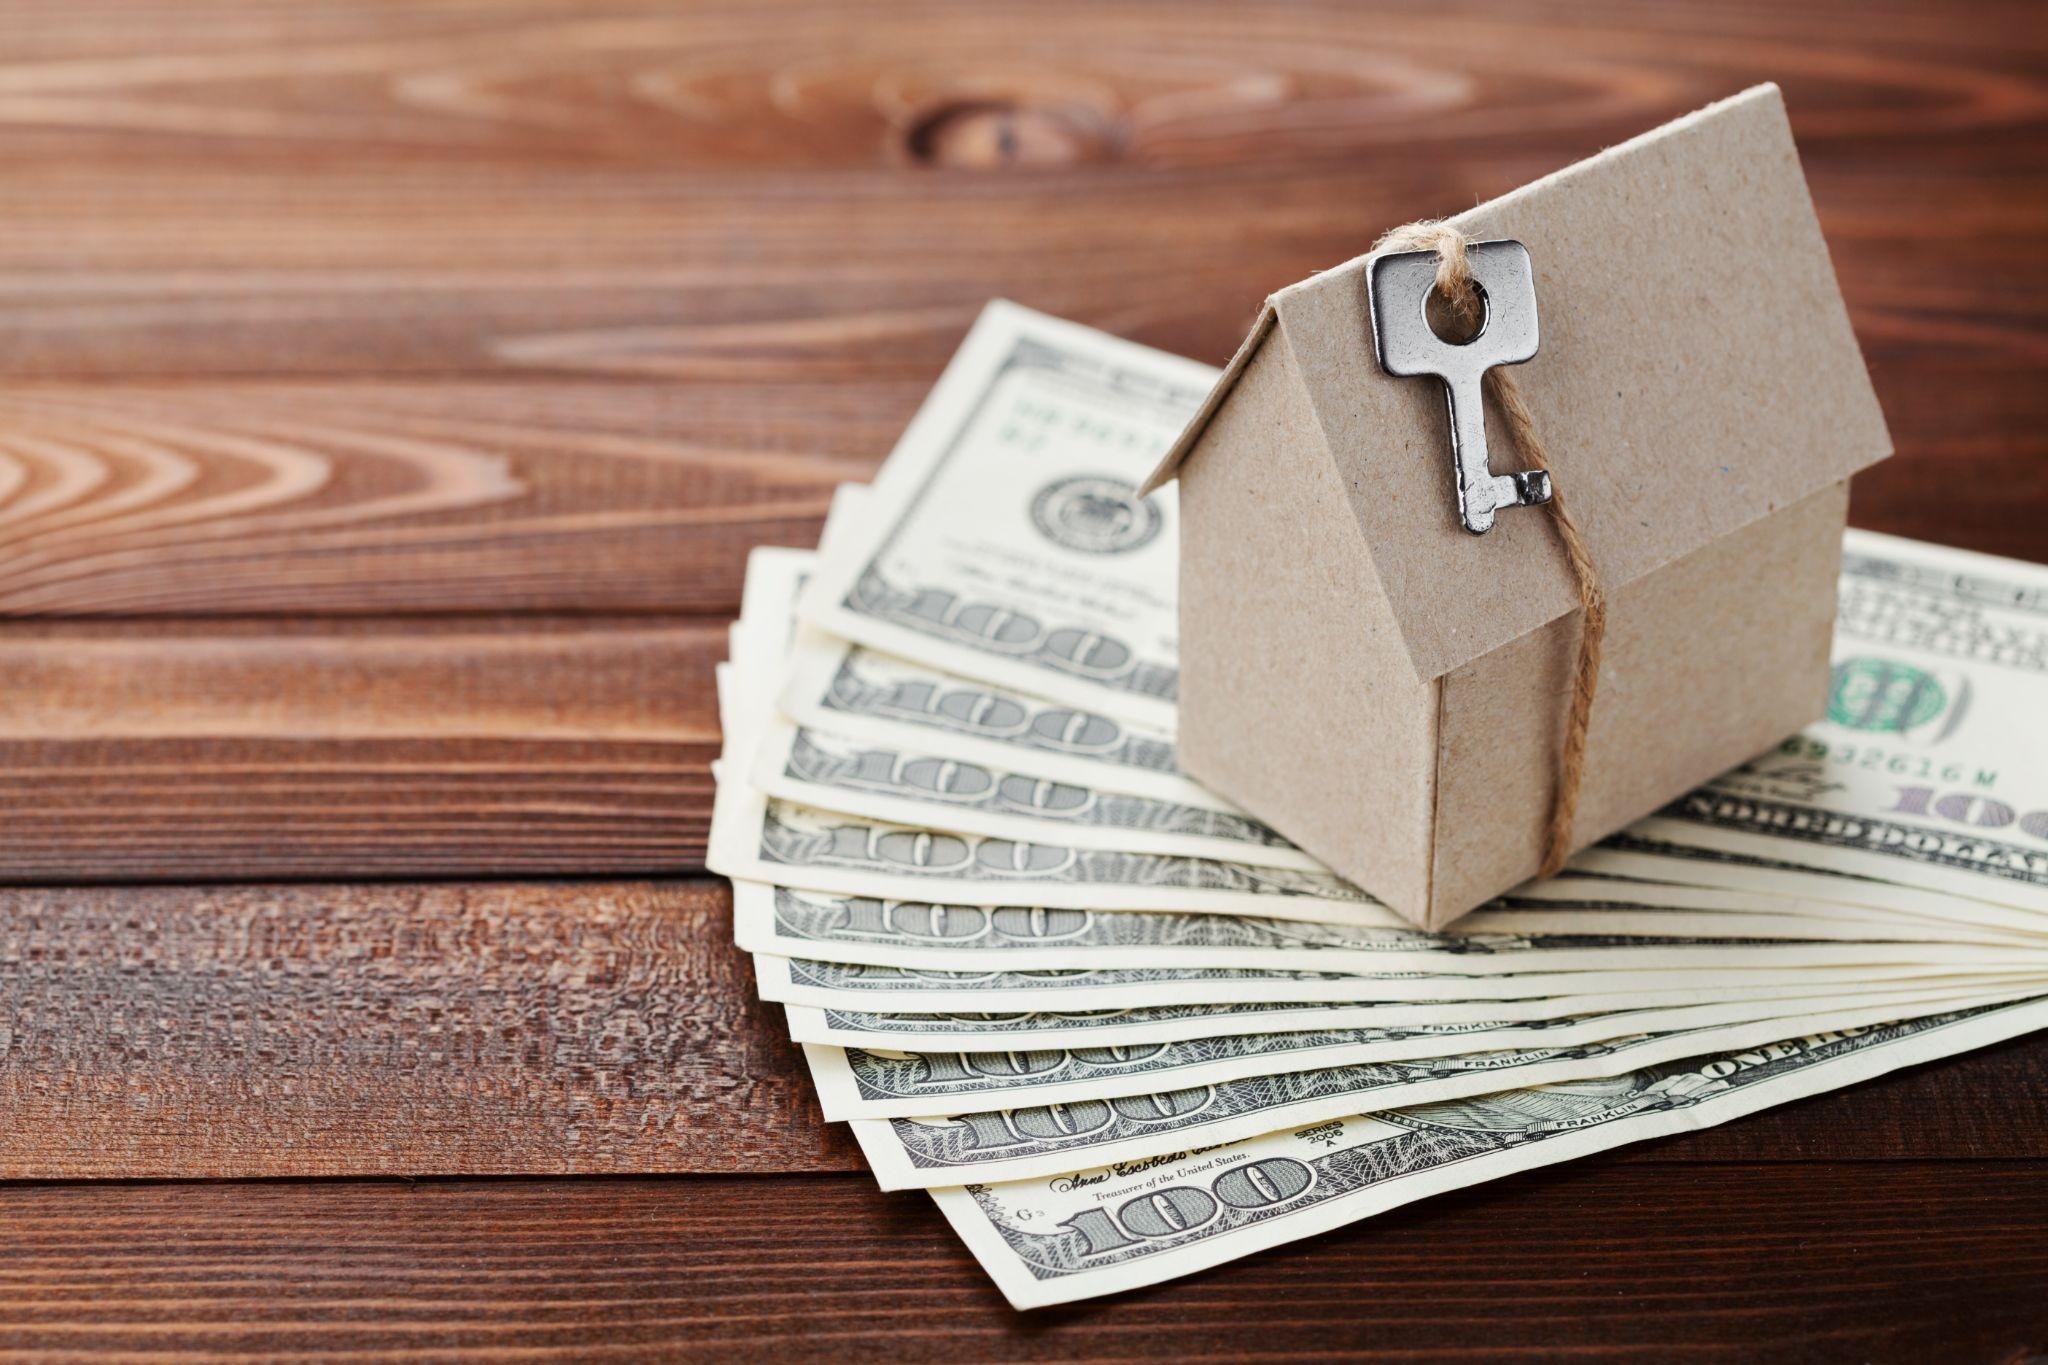 Cardboard house with key and dollar money. Building, insurance, housewarming, loan, real estate, cost of housing or buying a new home concept.